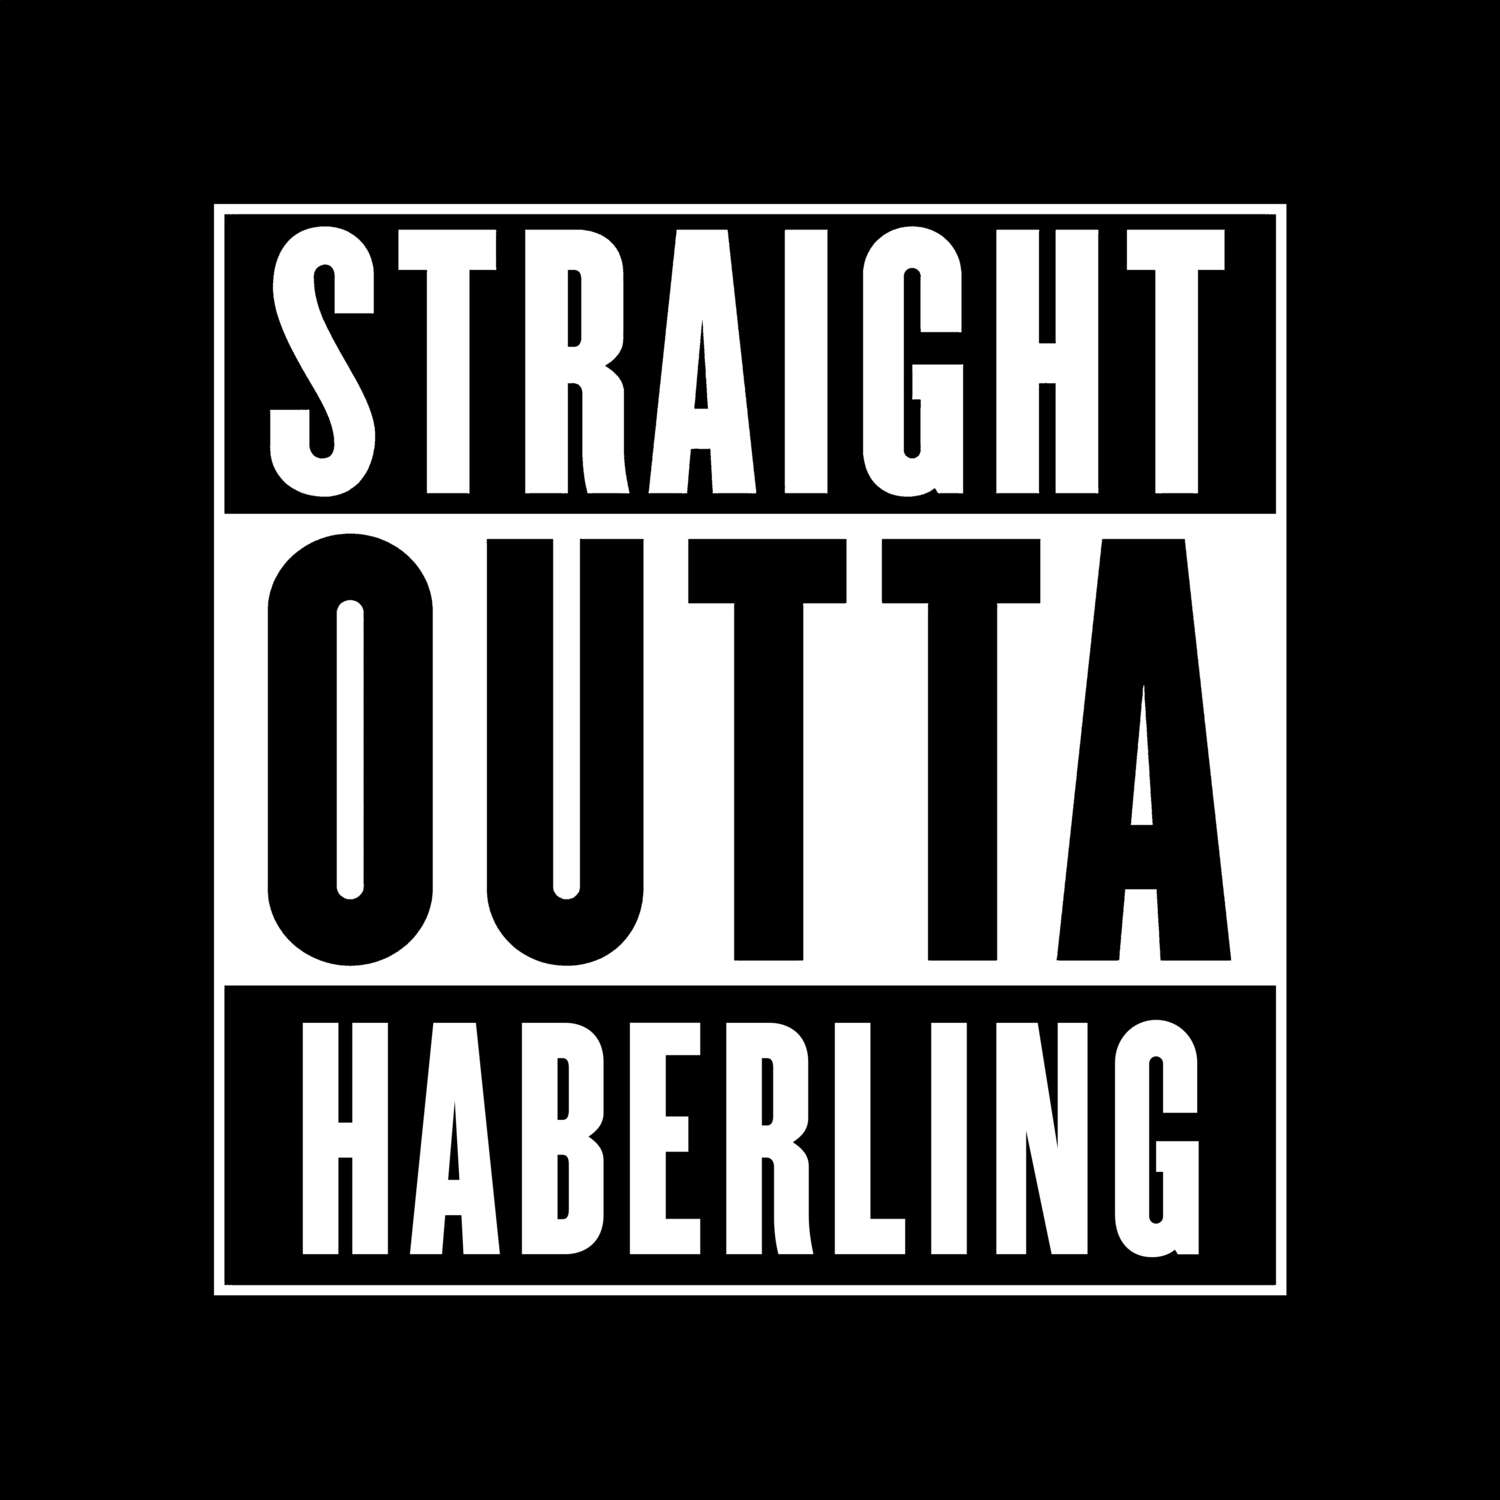 Haberling T-Shirt »Straight Outta«